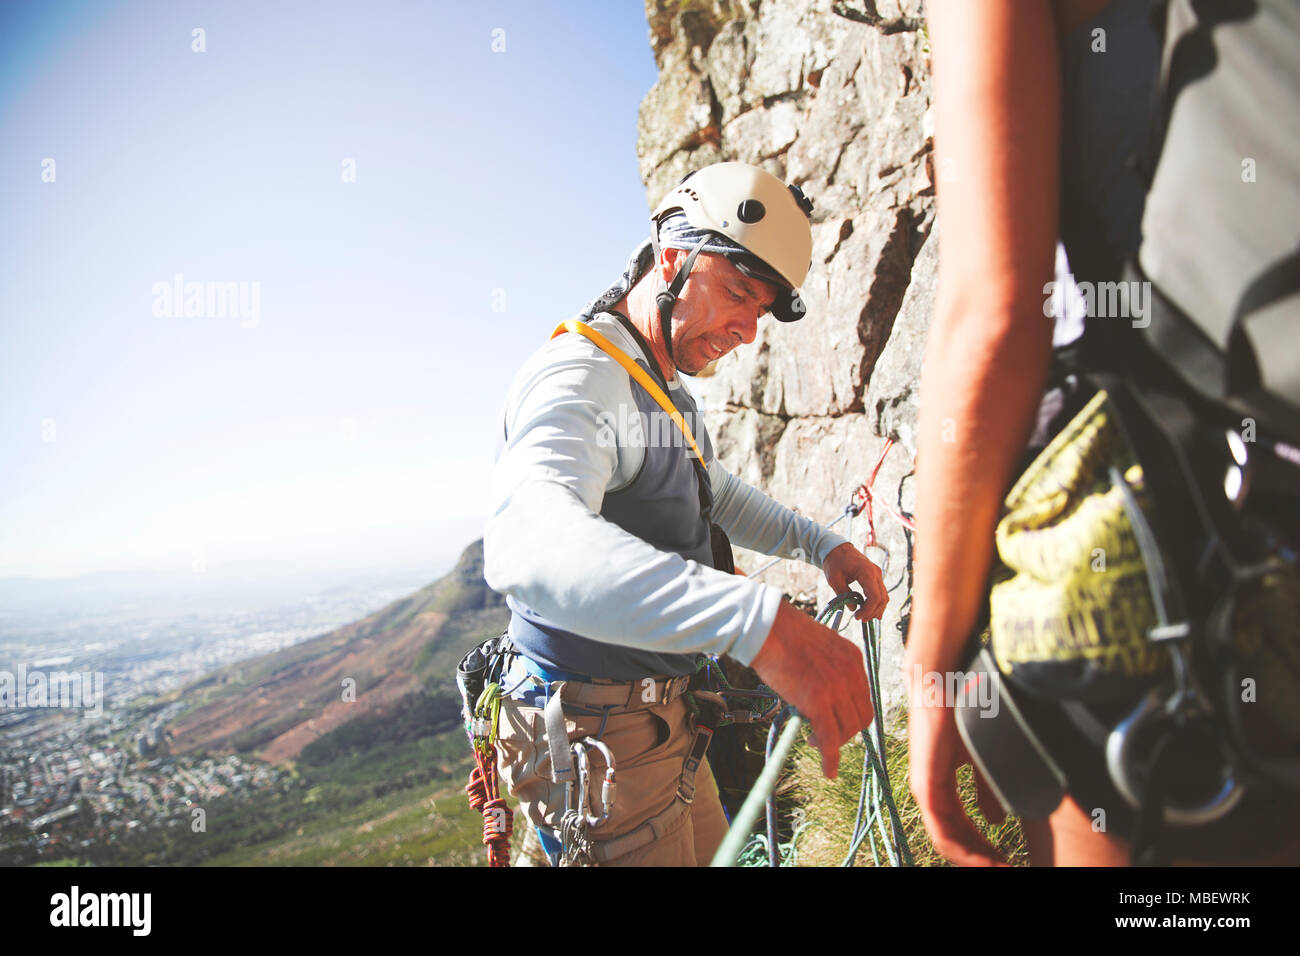 Male rock climber adjusting ropes Stock Photo